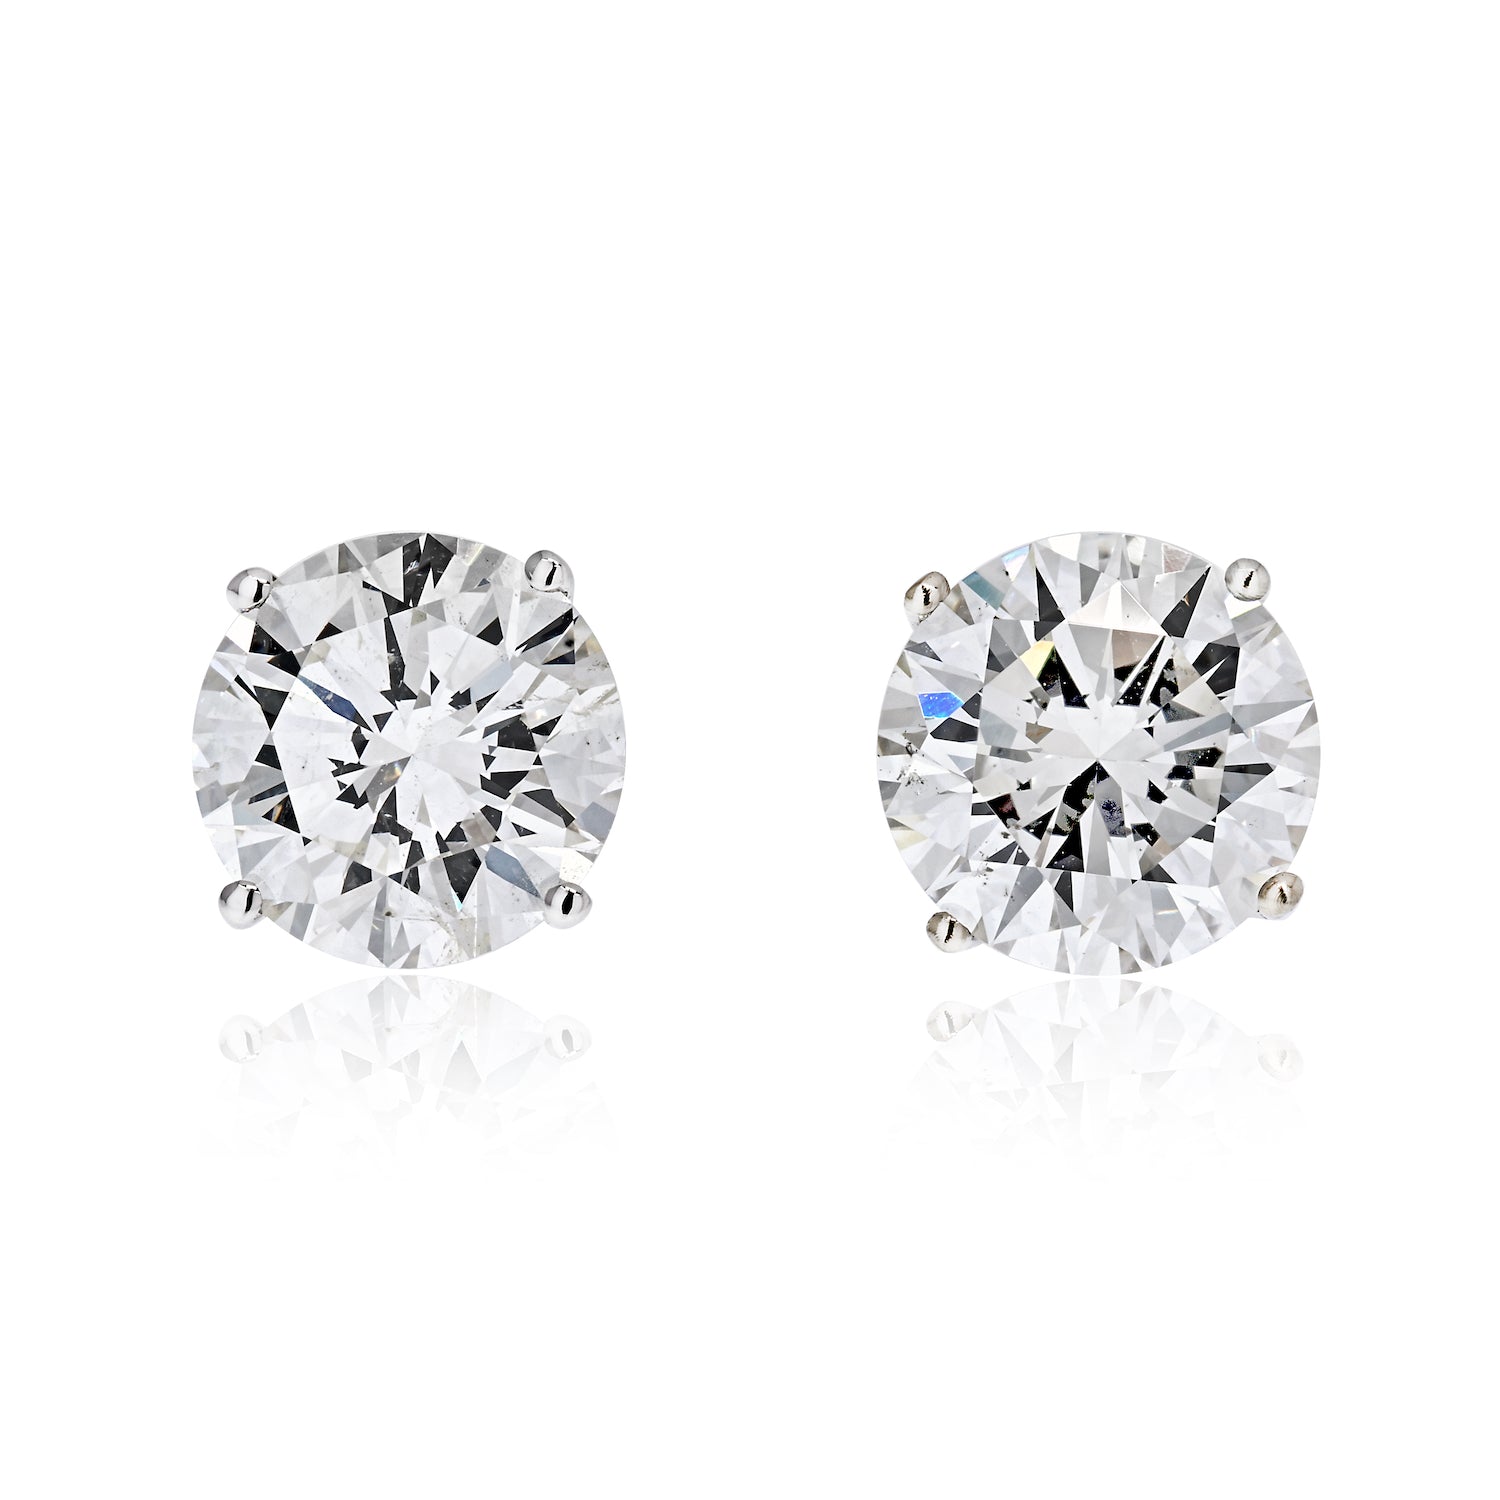 Shop Diamond Stud Earrings At Wholesale Prices | The Back Vault